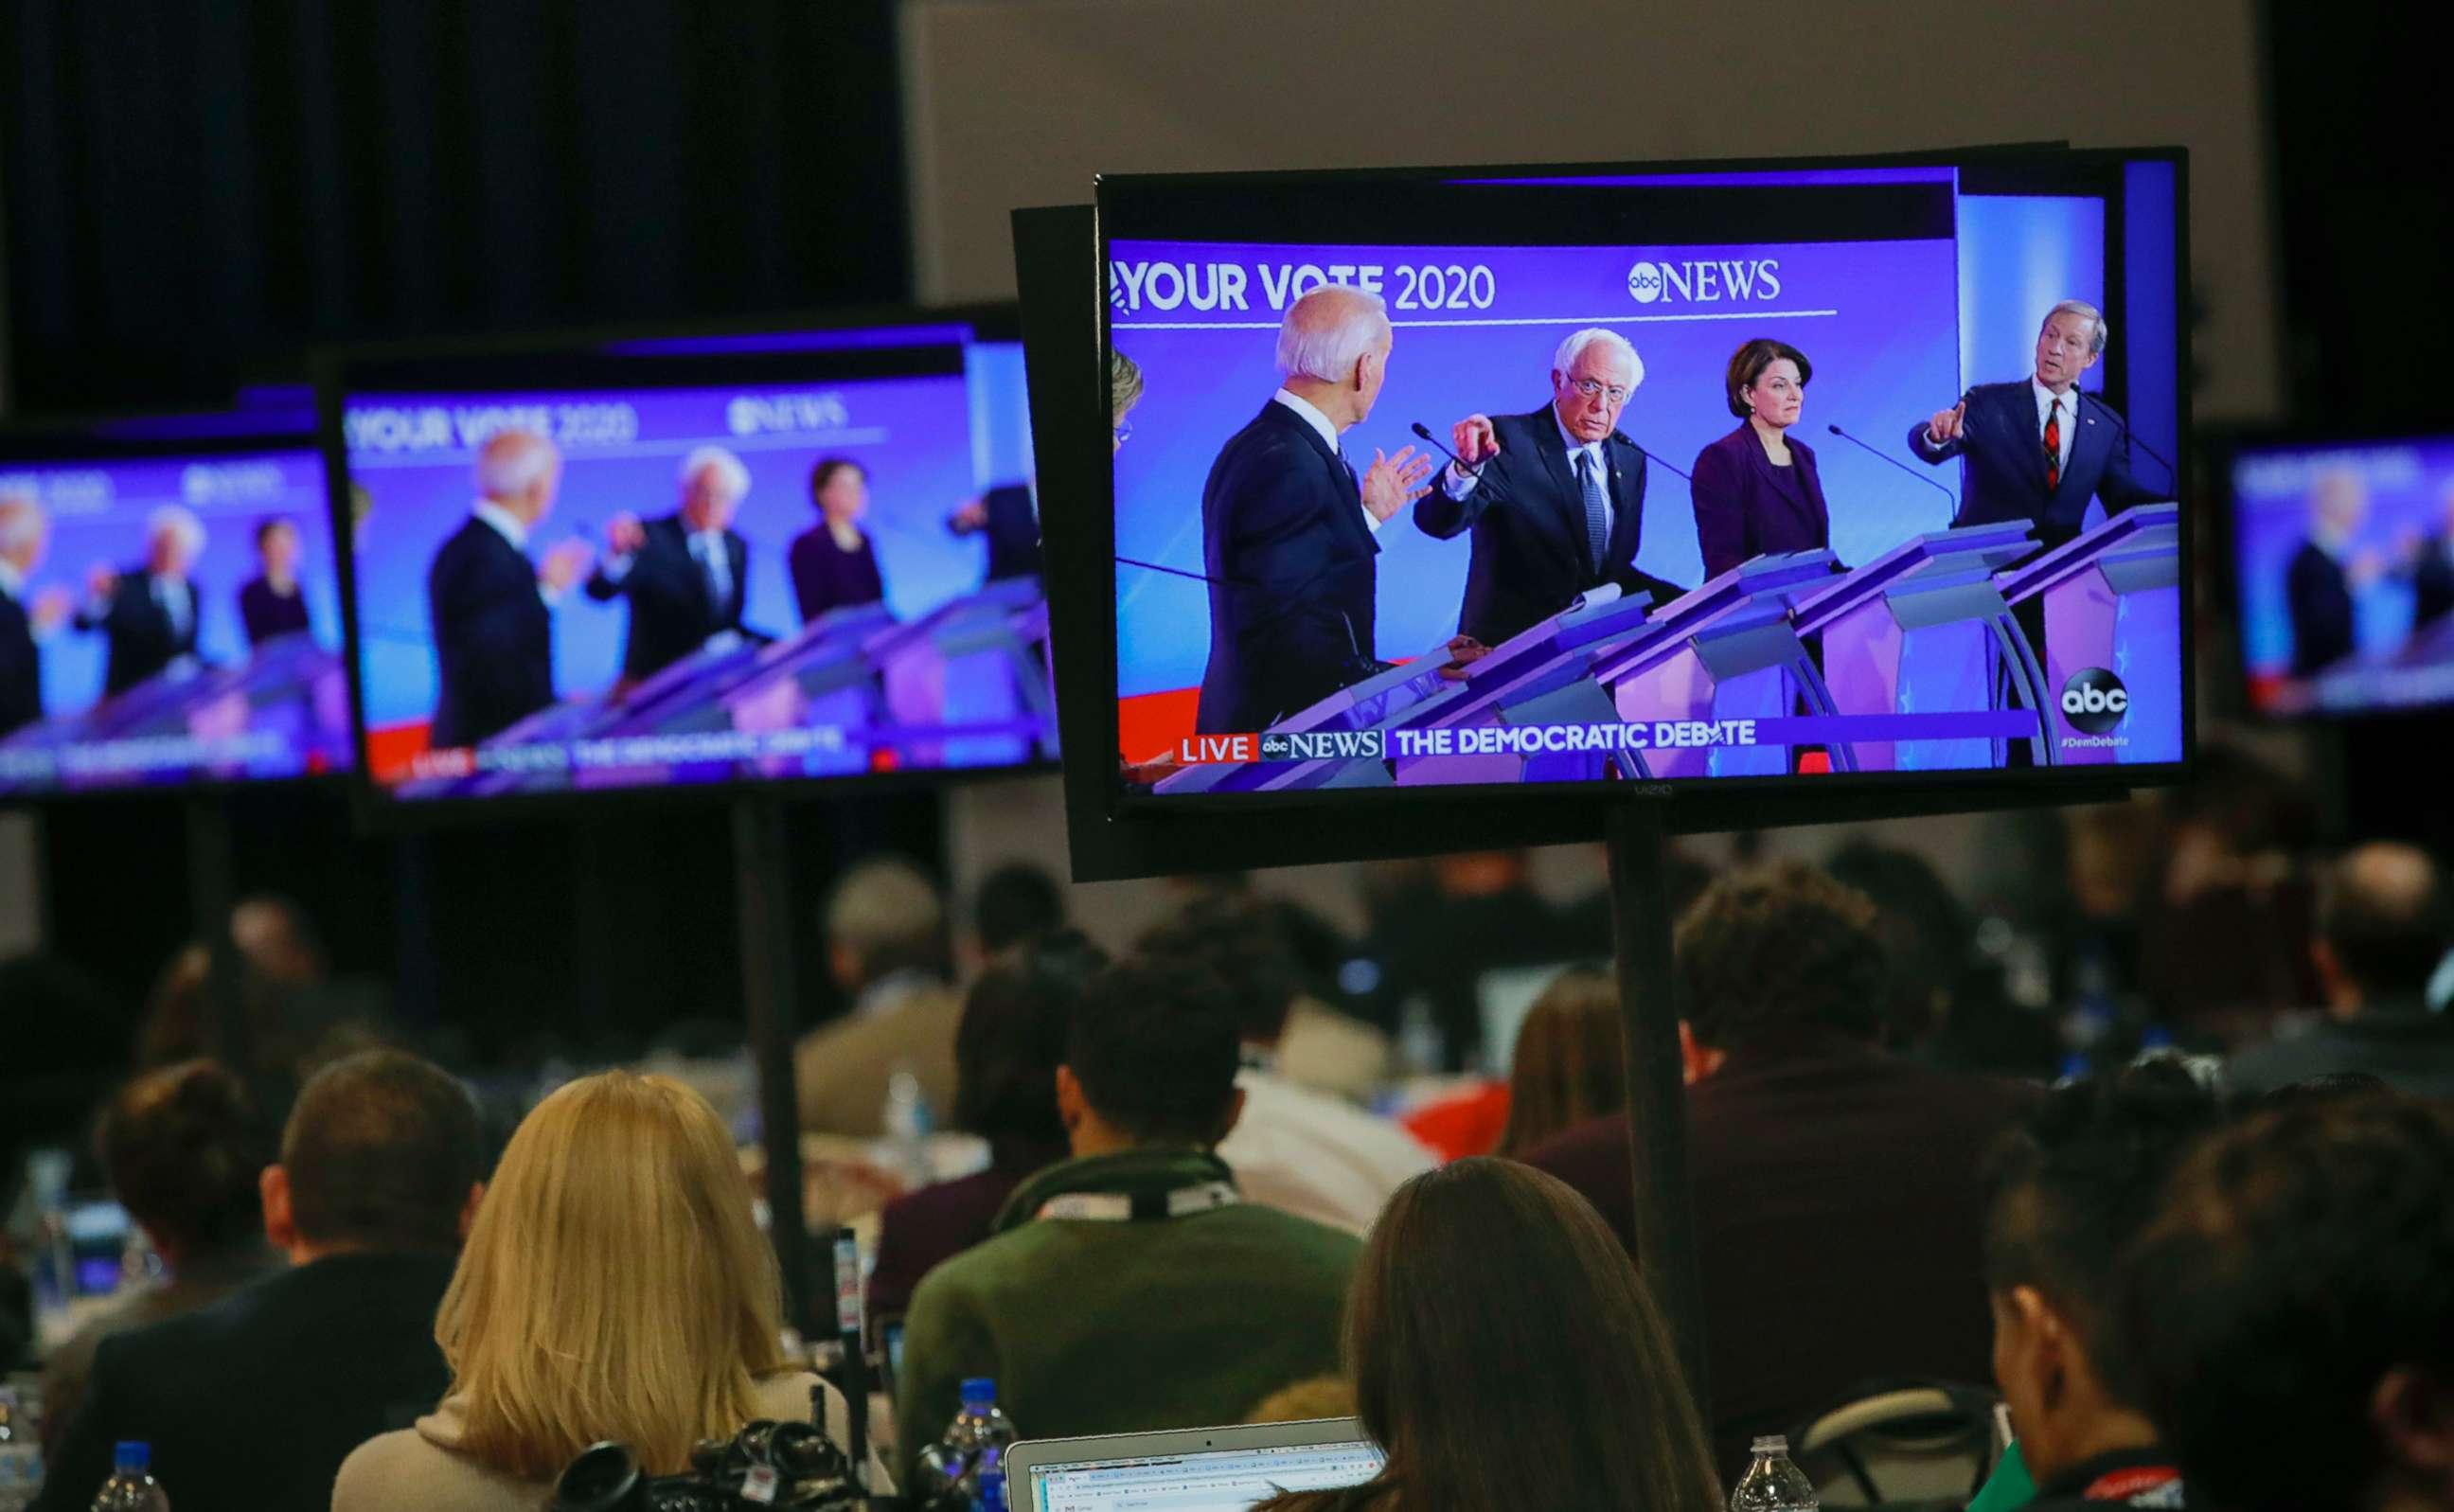 PHOTO: Members of the media watch the broadcast of the Democratic presidential primary debate, Feb. 7, 2020, at Saint Anselm College in Manchester, N.H.